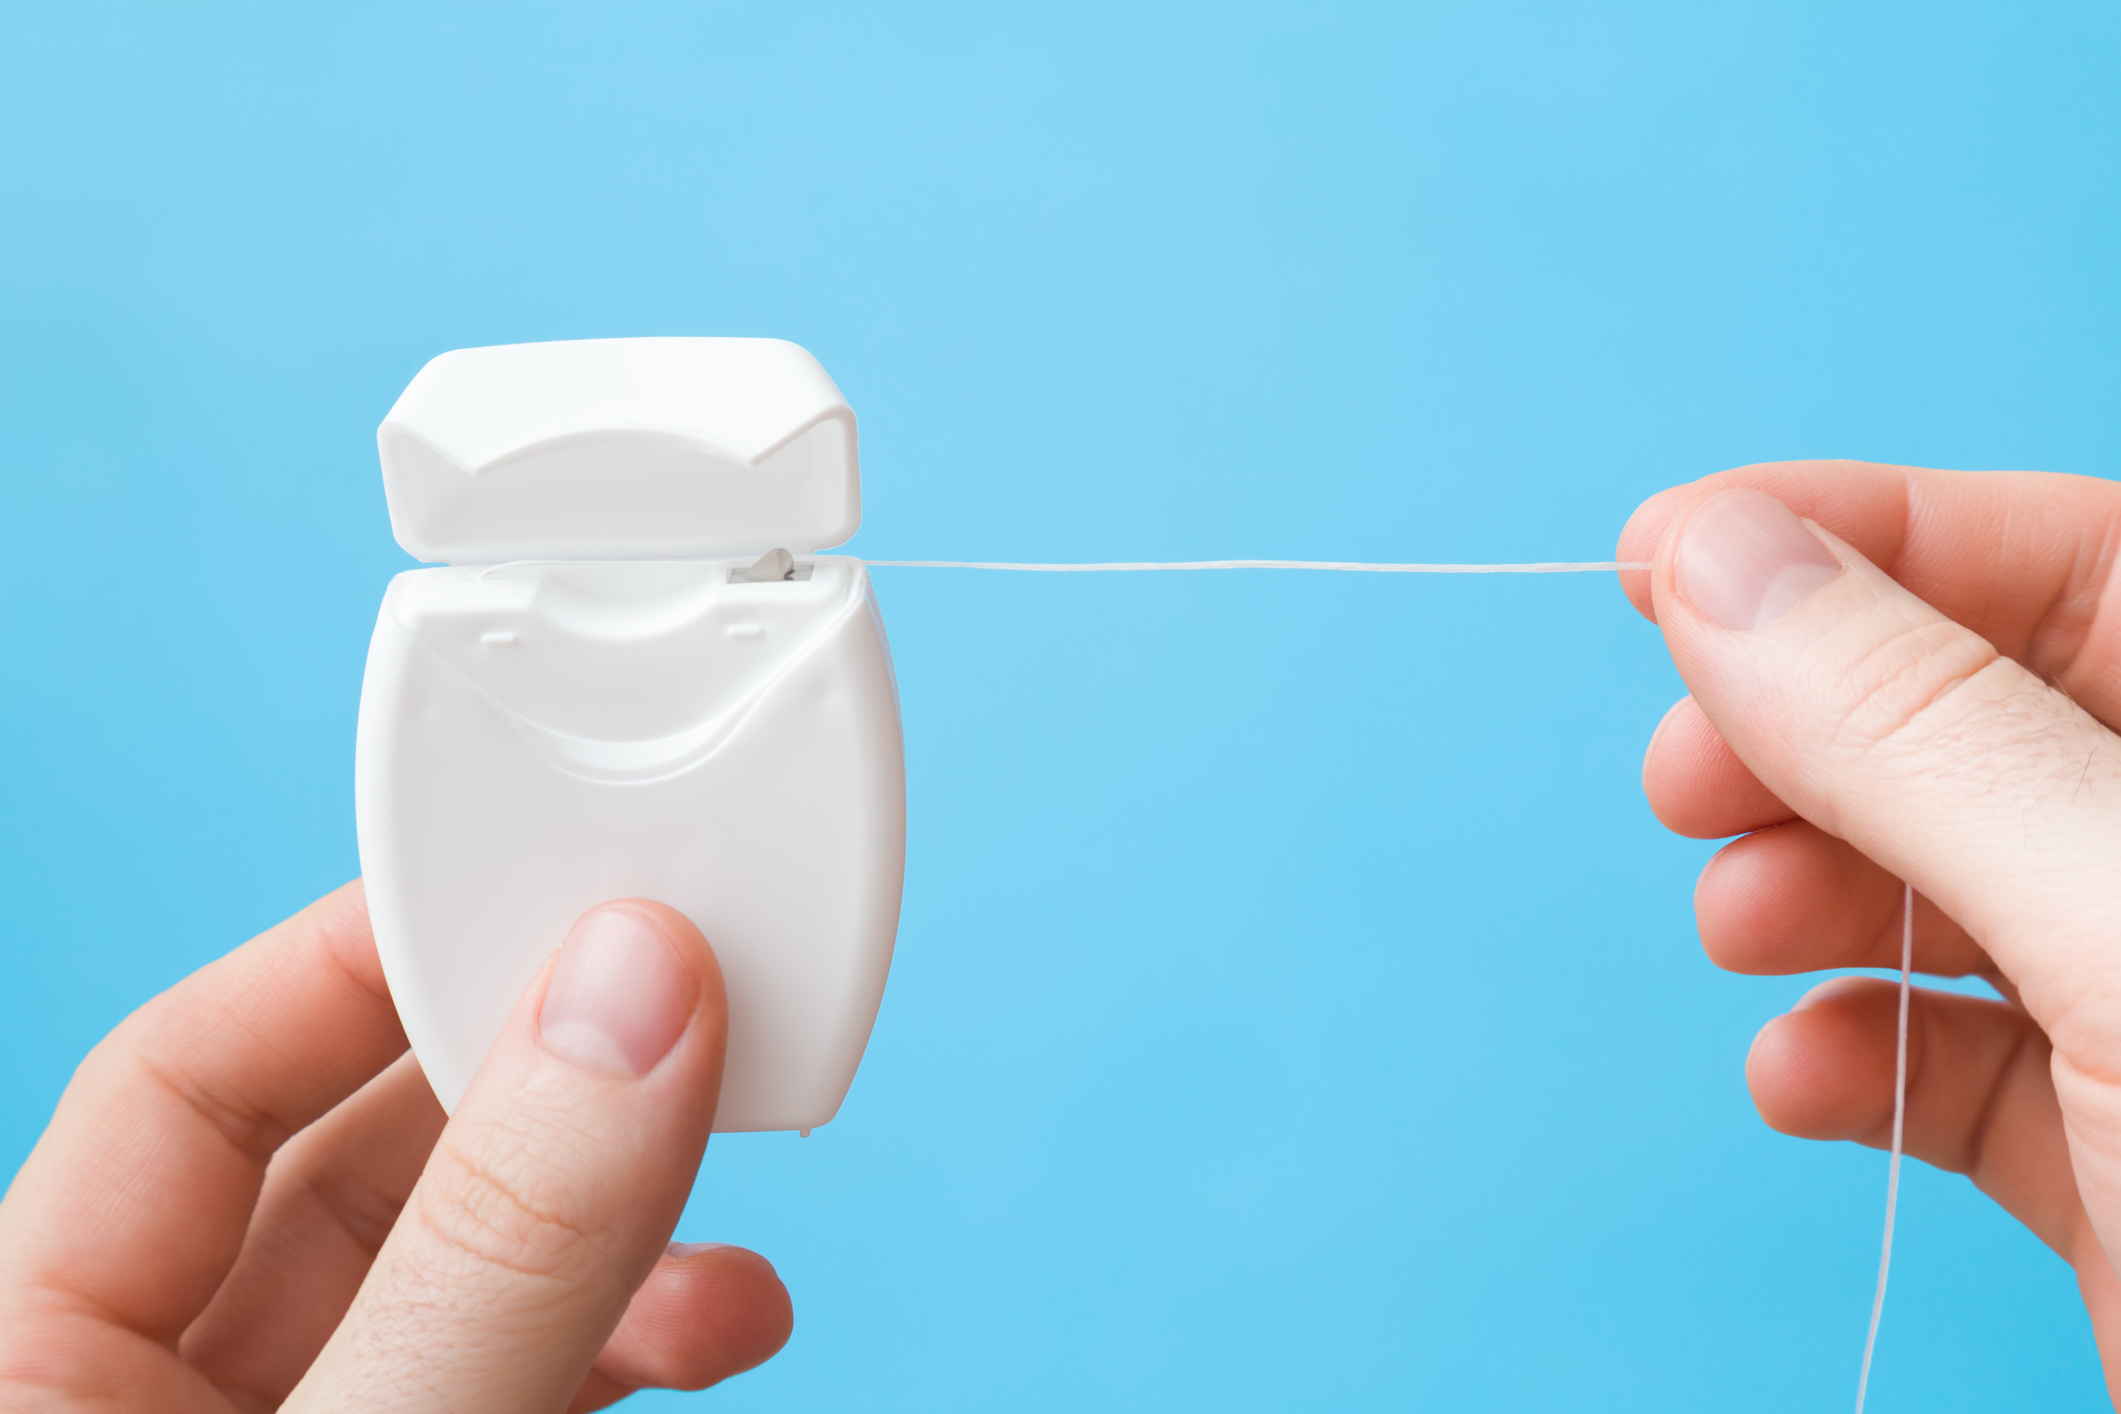 Two hands using dental floss from a white dispenser against a blue background